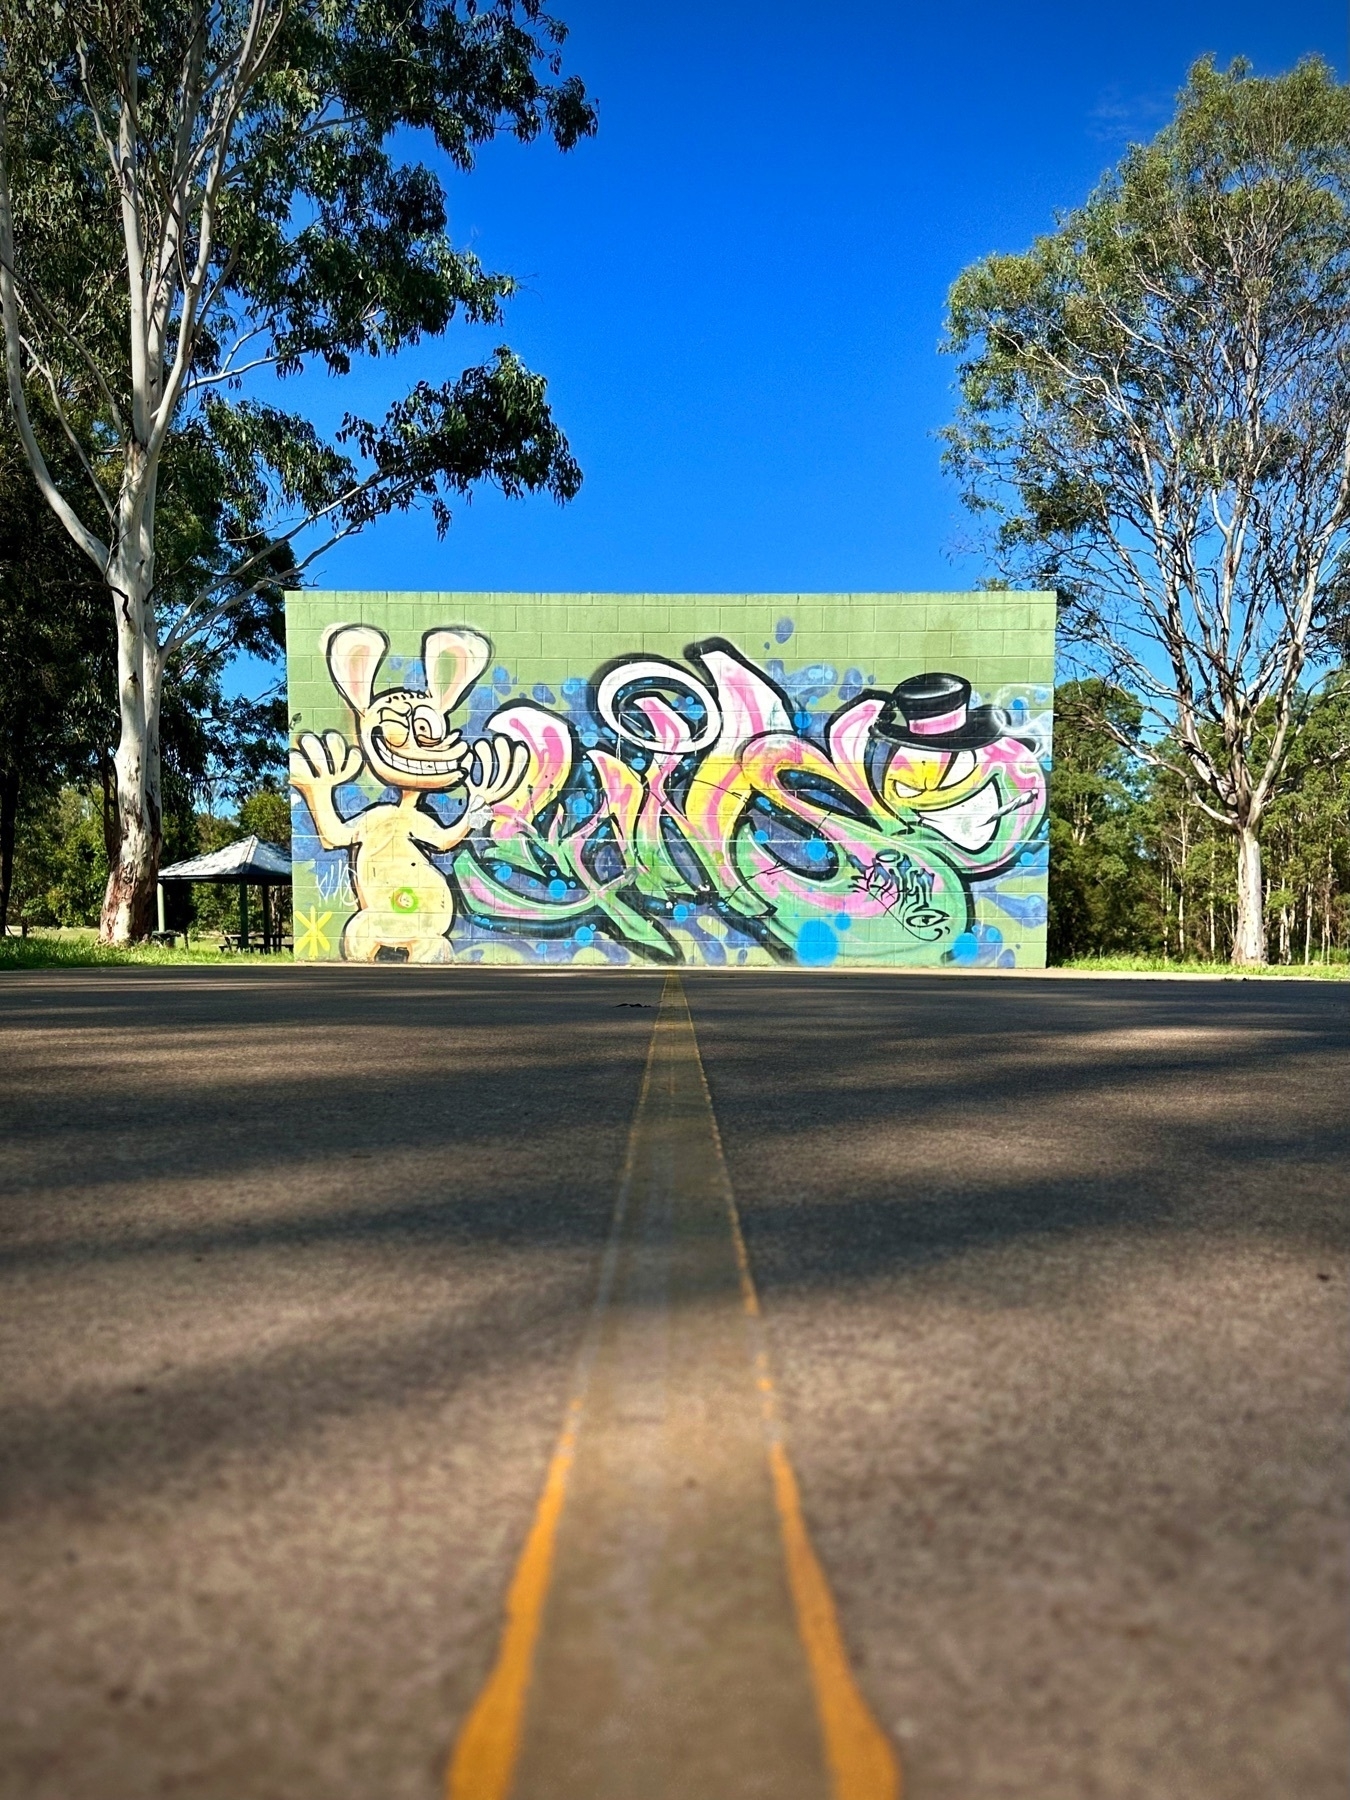 Looking at ground level along the yellow dividing line of an outdoor handball court. The line leads into the distance, terminating at a free standing brick wall covered in street art depicting a crazy looking rabbit and a tophat wearing cigarette smoking angry emoji face. Gumtrees flank the wall in the distance.